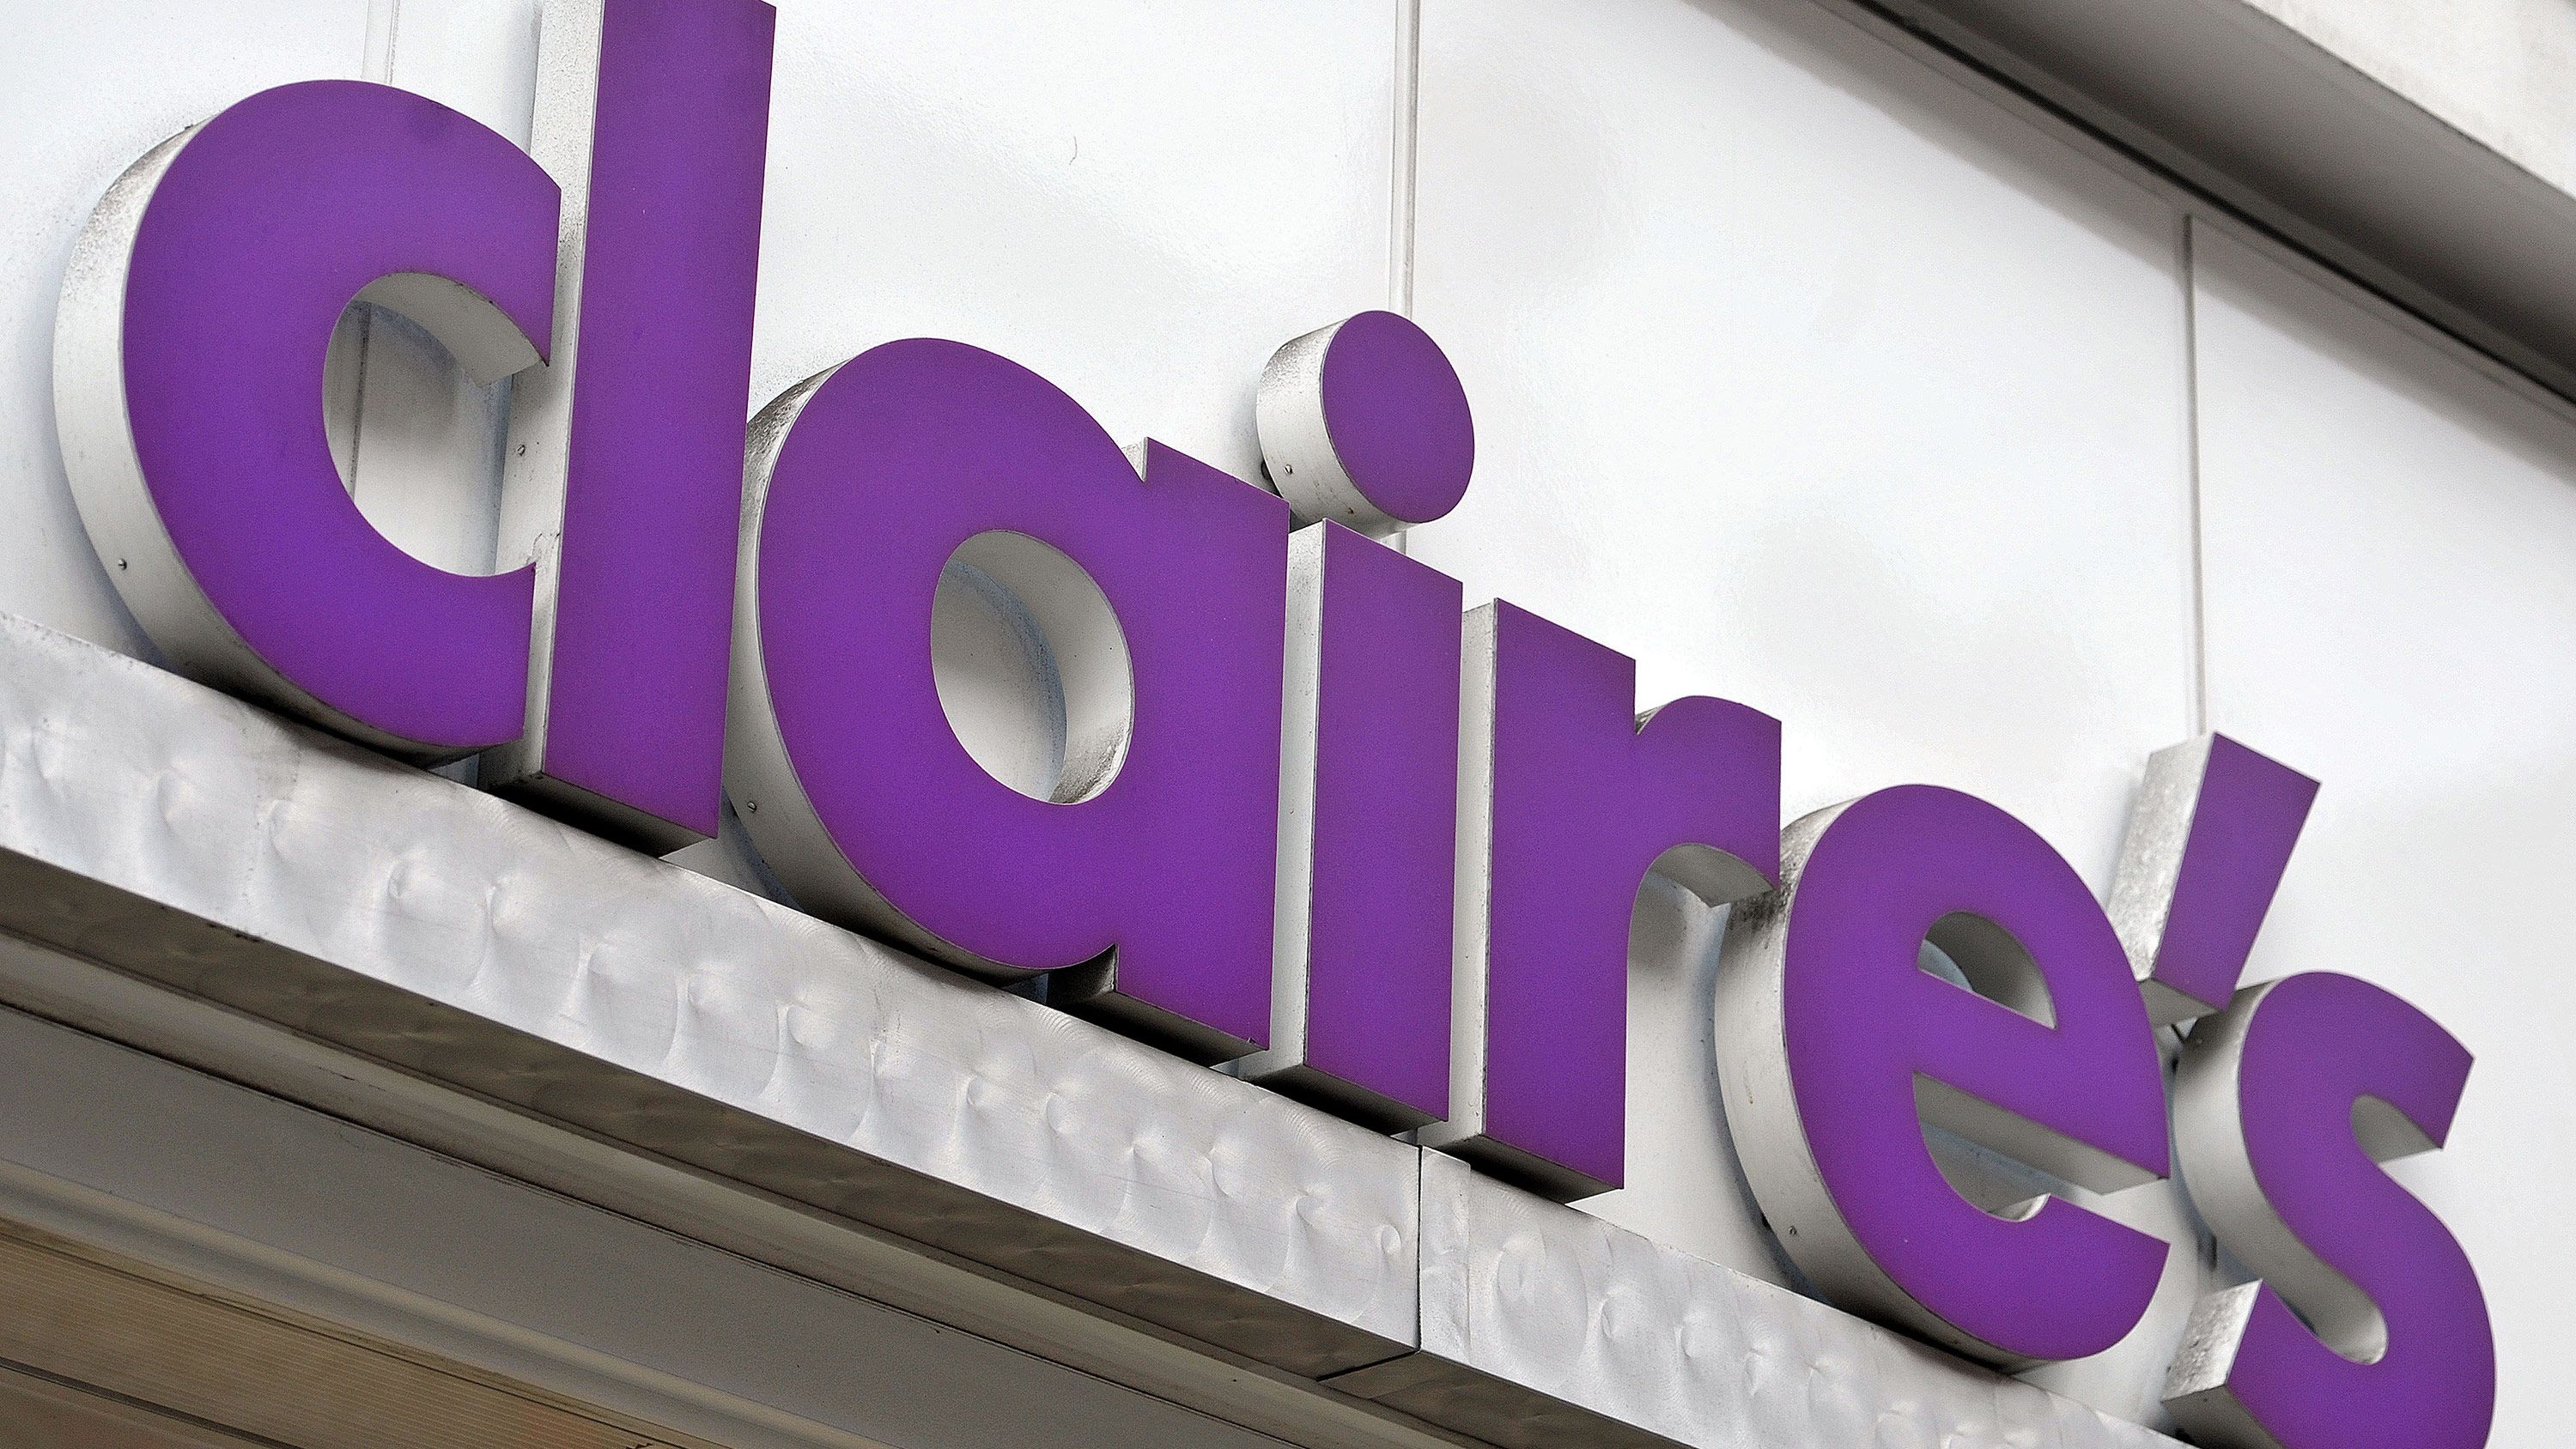 Children's Necklaces Sold Exclusively at Claire's Stores Recalled Due to  Lead Poisoning Hazard